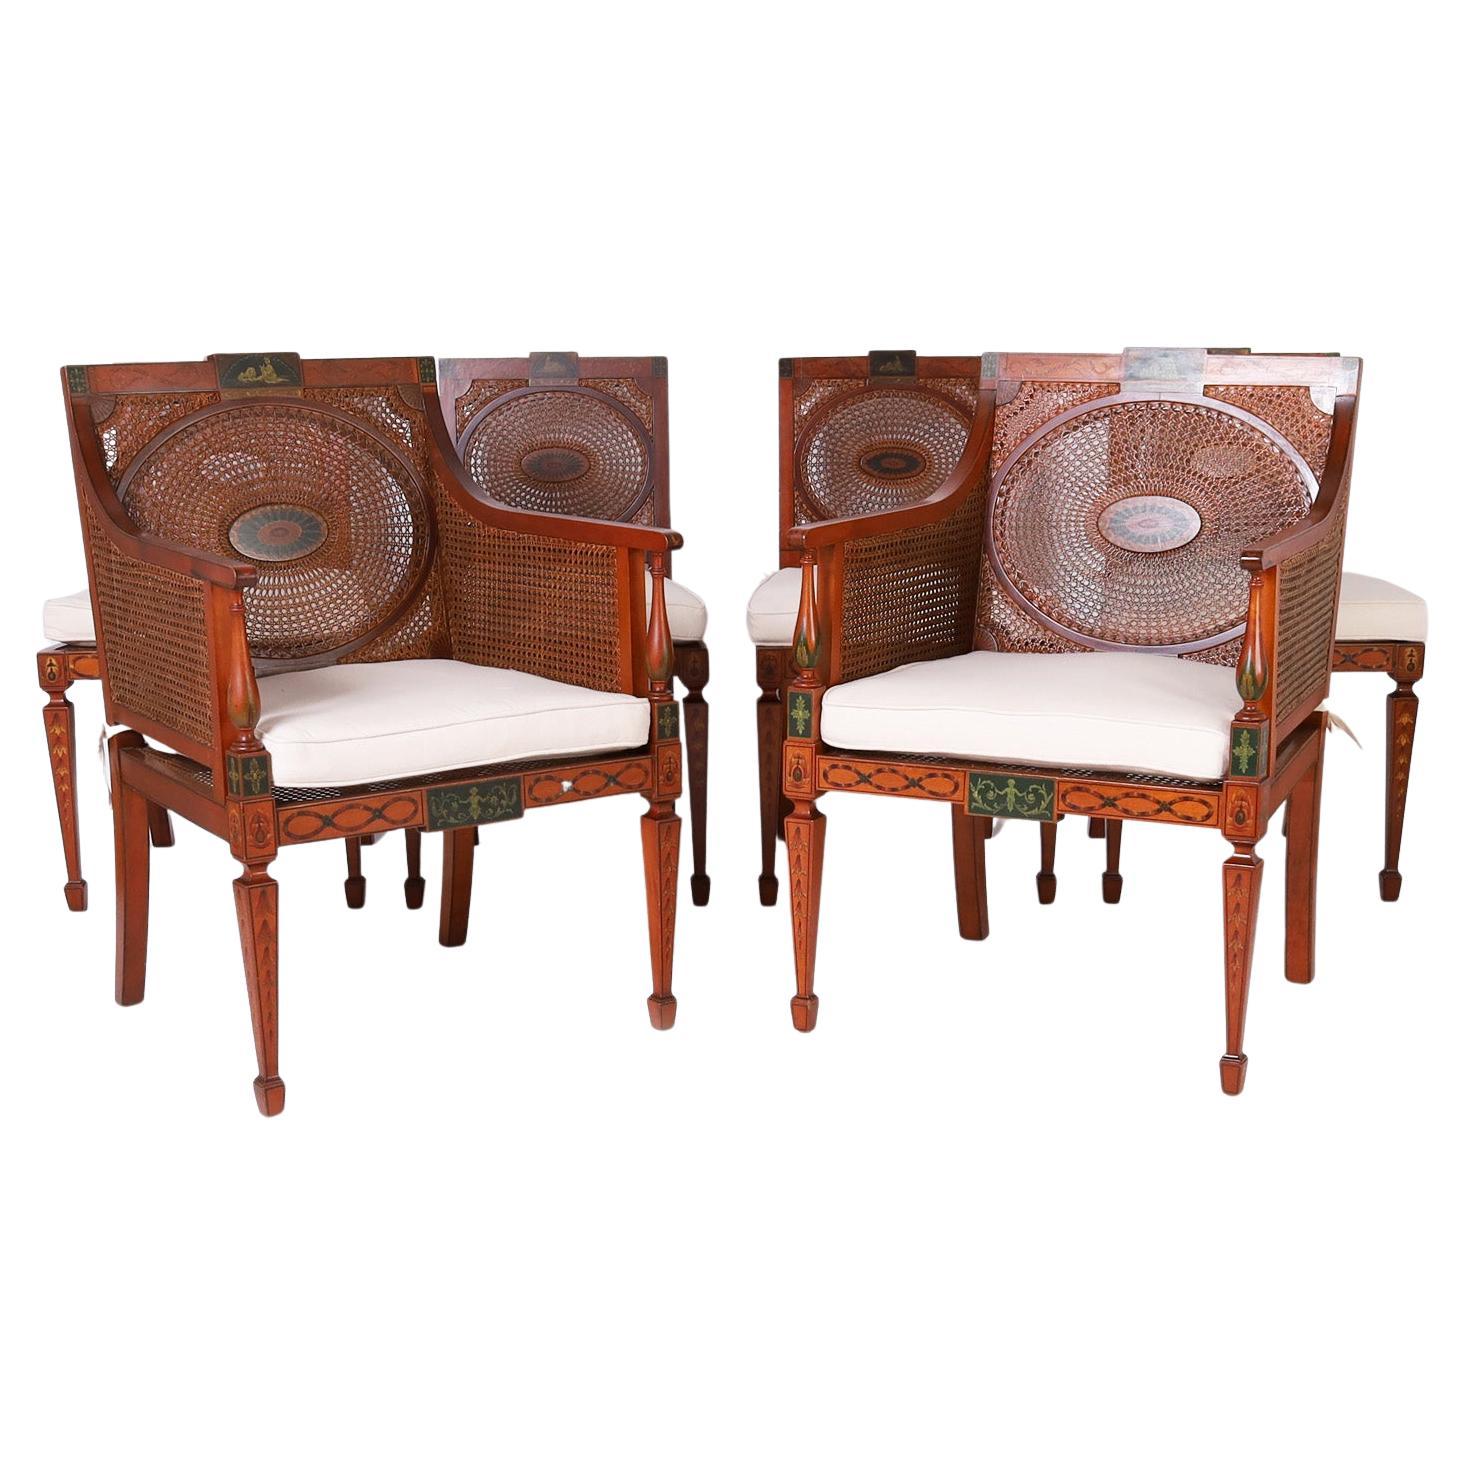 Six Neoclassic Caned and Decorated Adam Style Dining Chairs For Sale